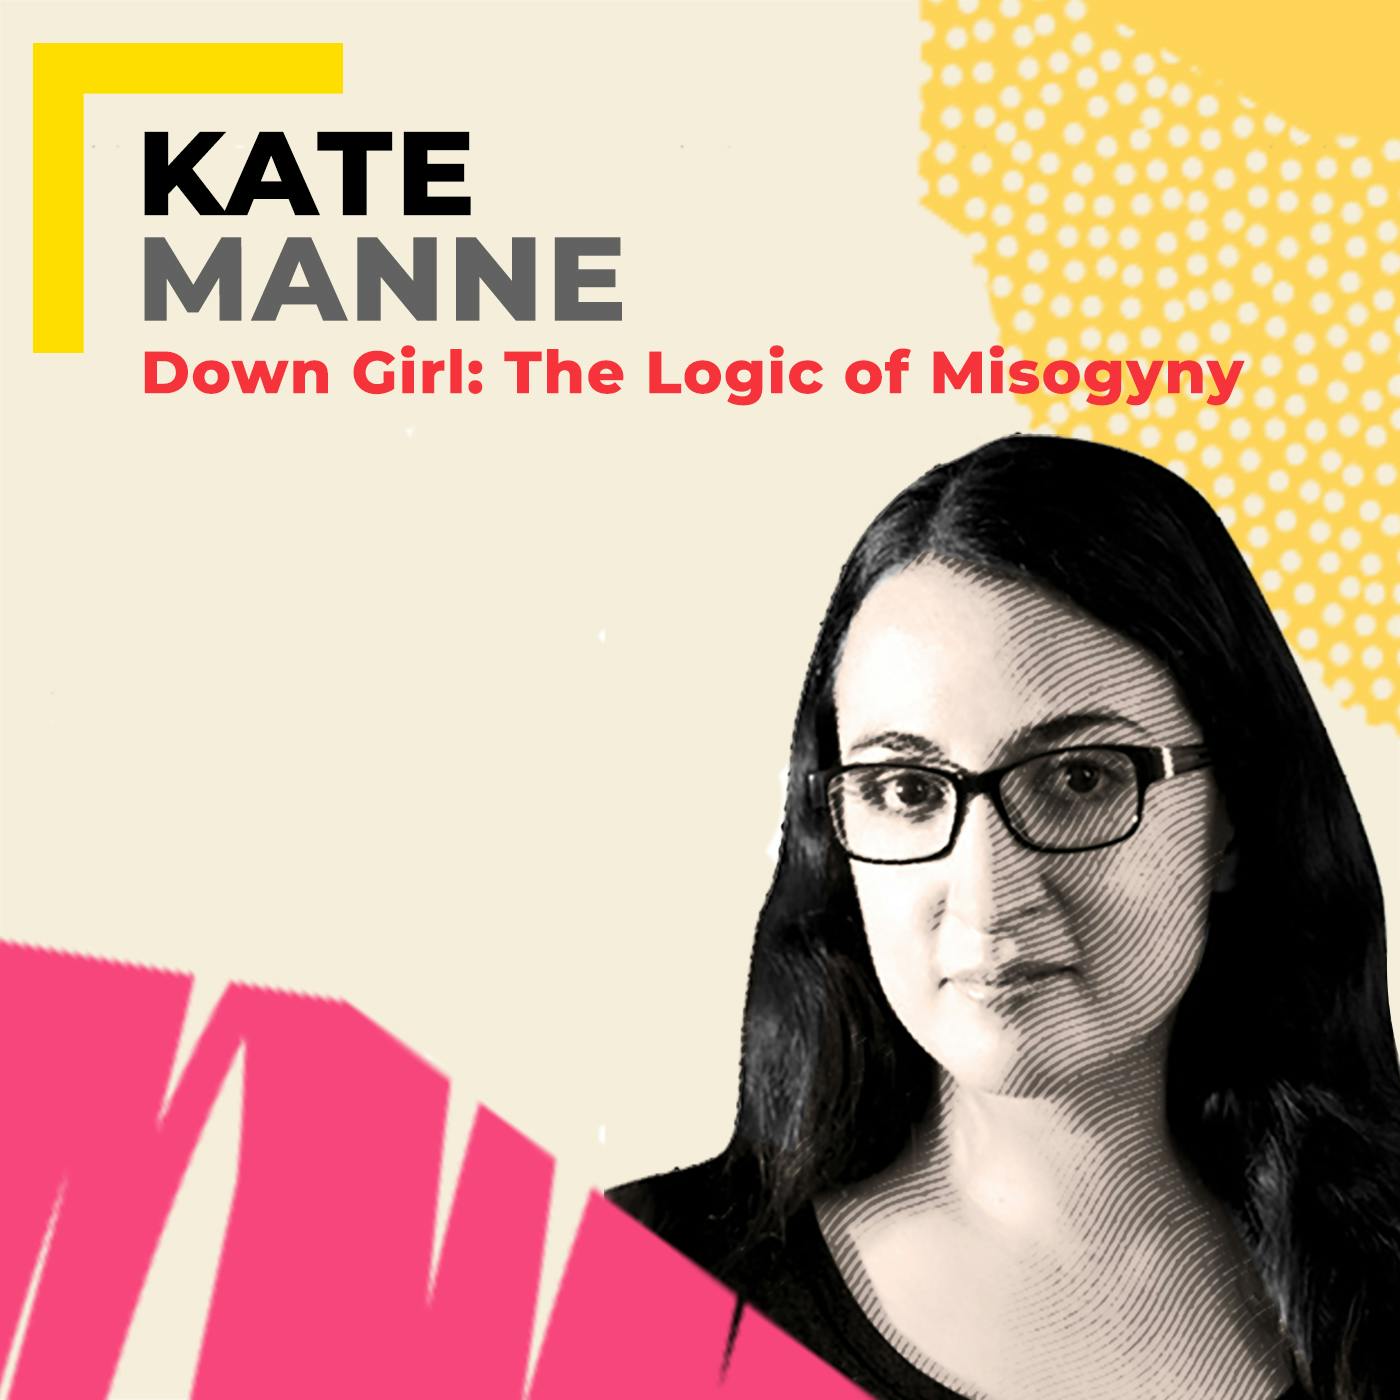 Kate Manne: Philosopher & Author of 